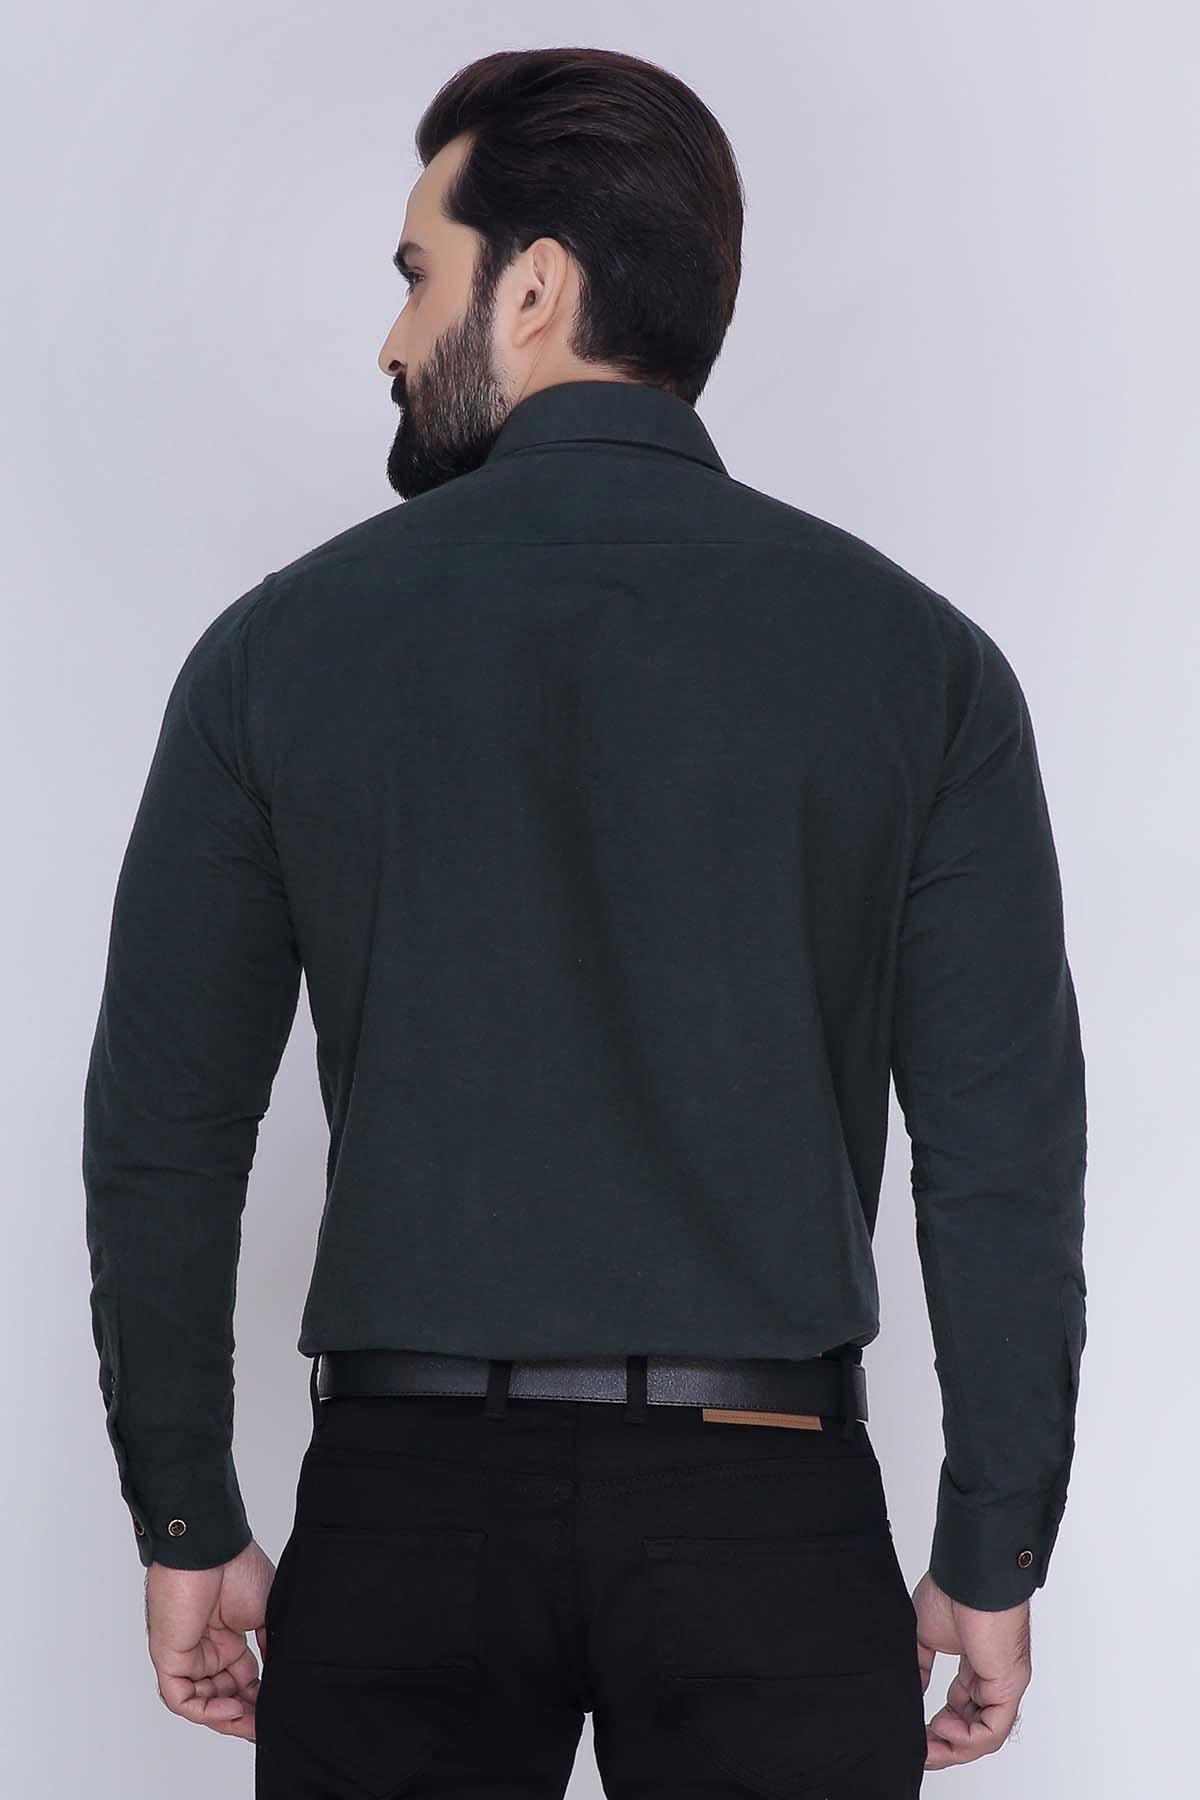 SMART SHIRT FULL SLEEVE BOTTLE GREEN at Charcoal Clothing